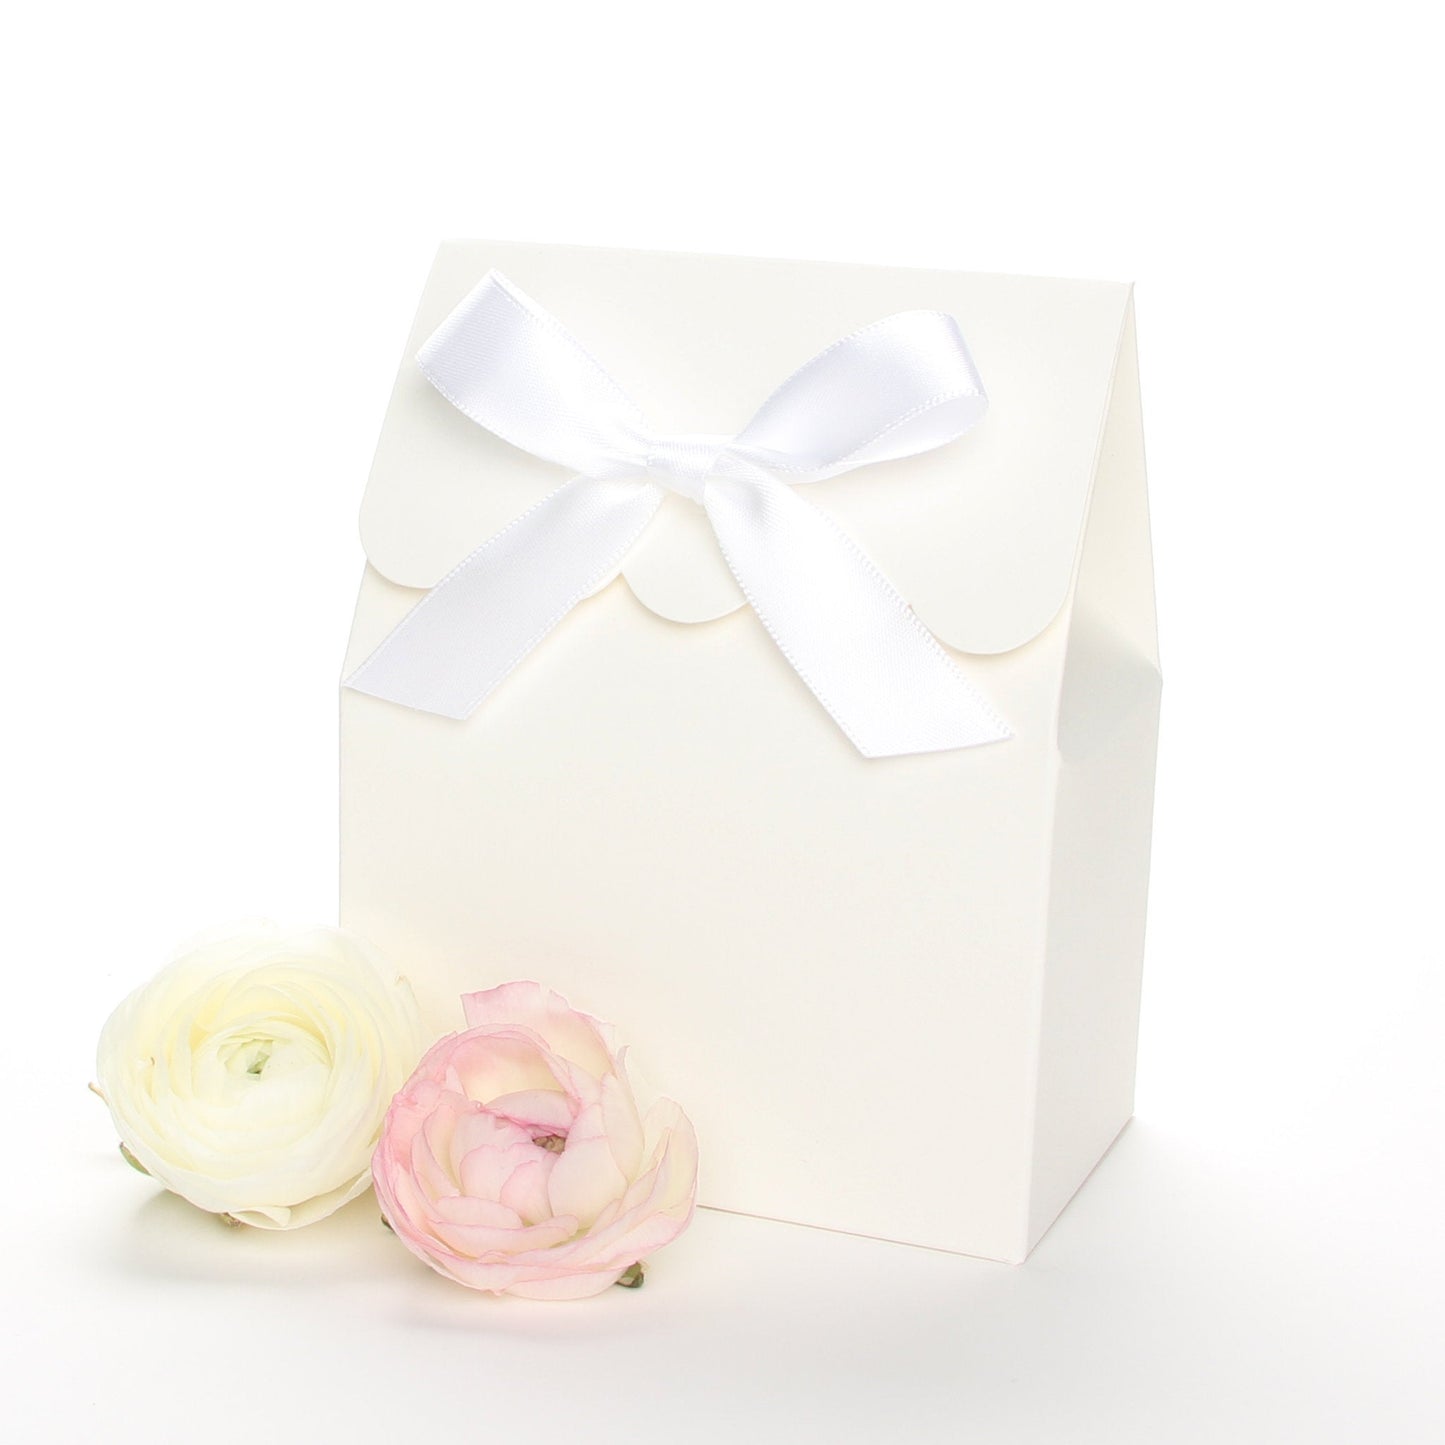 Lux Party’s ivory favor box with a scalloped edge and a white satin bow next to pink and white ranunculus flowers.